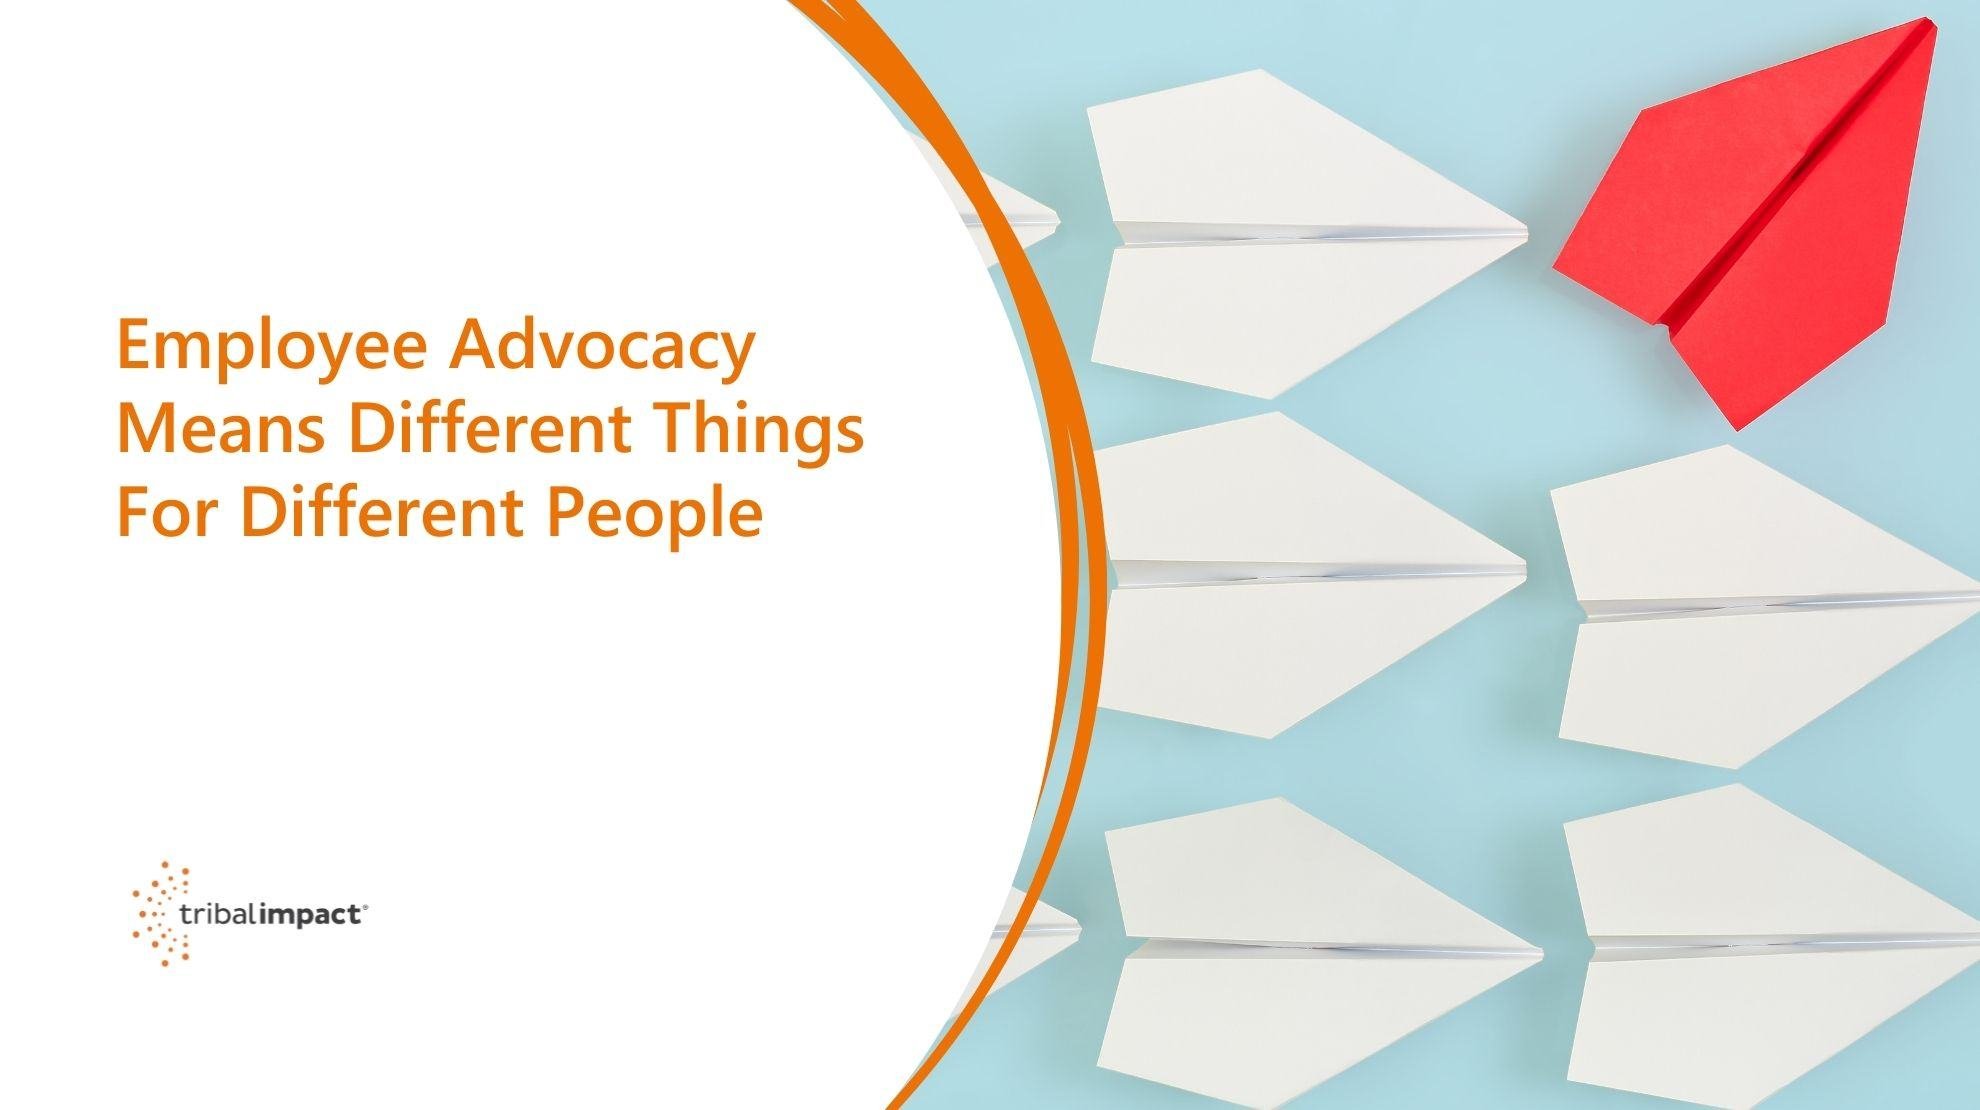 Employee Advocacy Means Different Things For Different People blog image